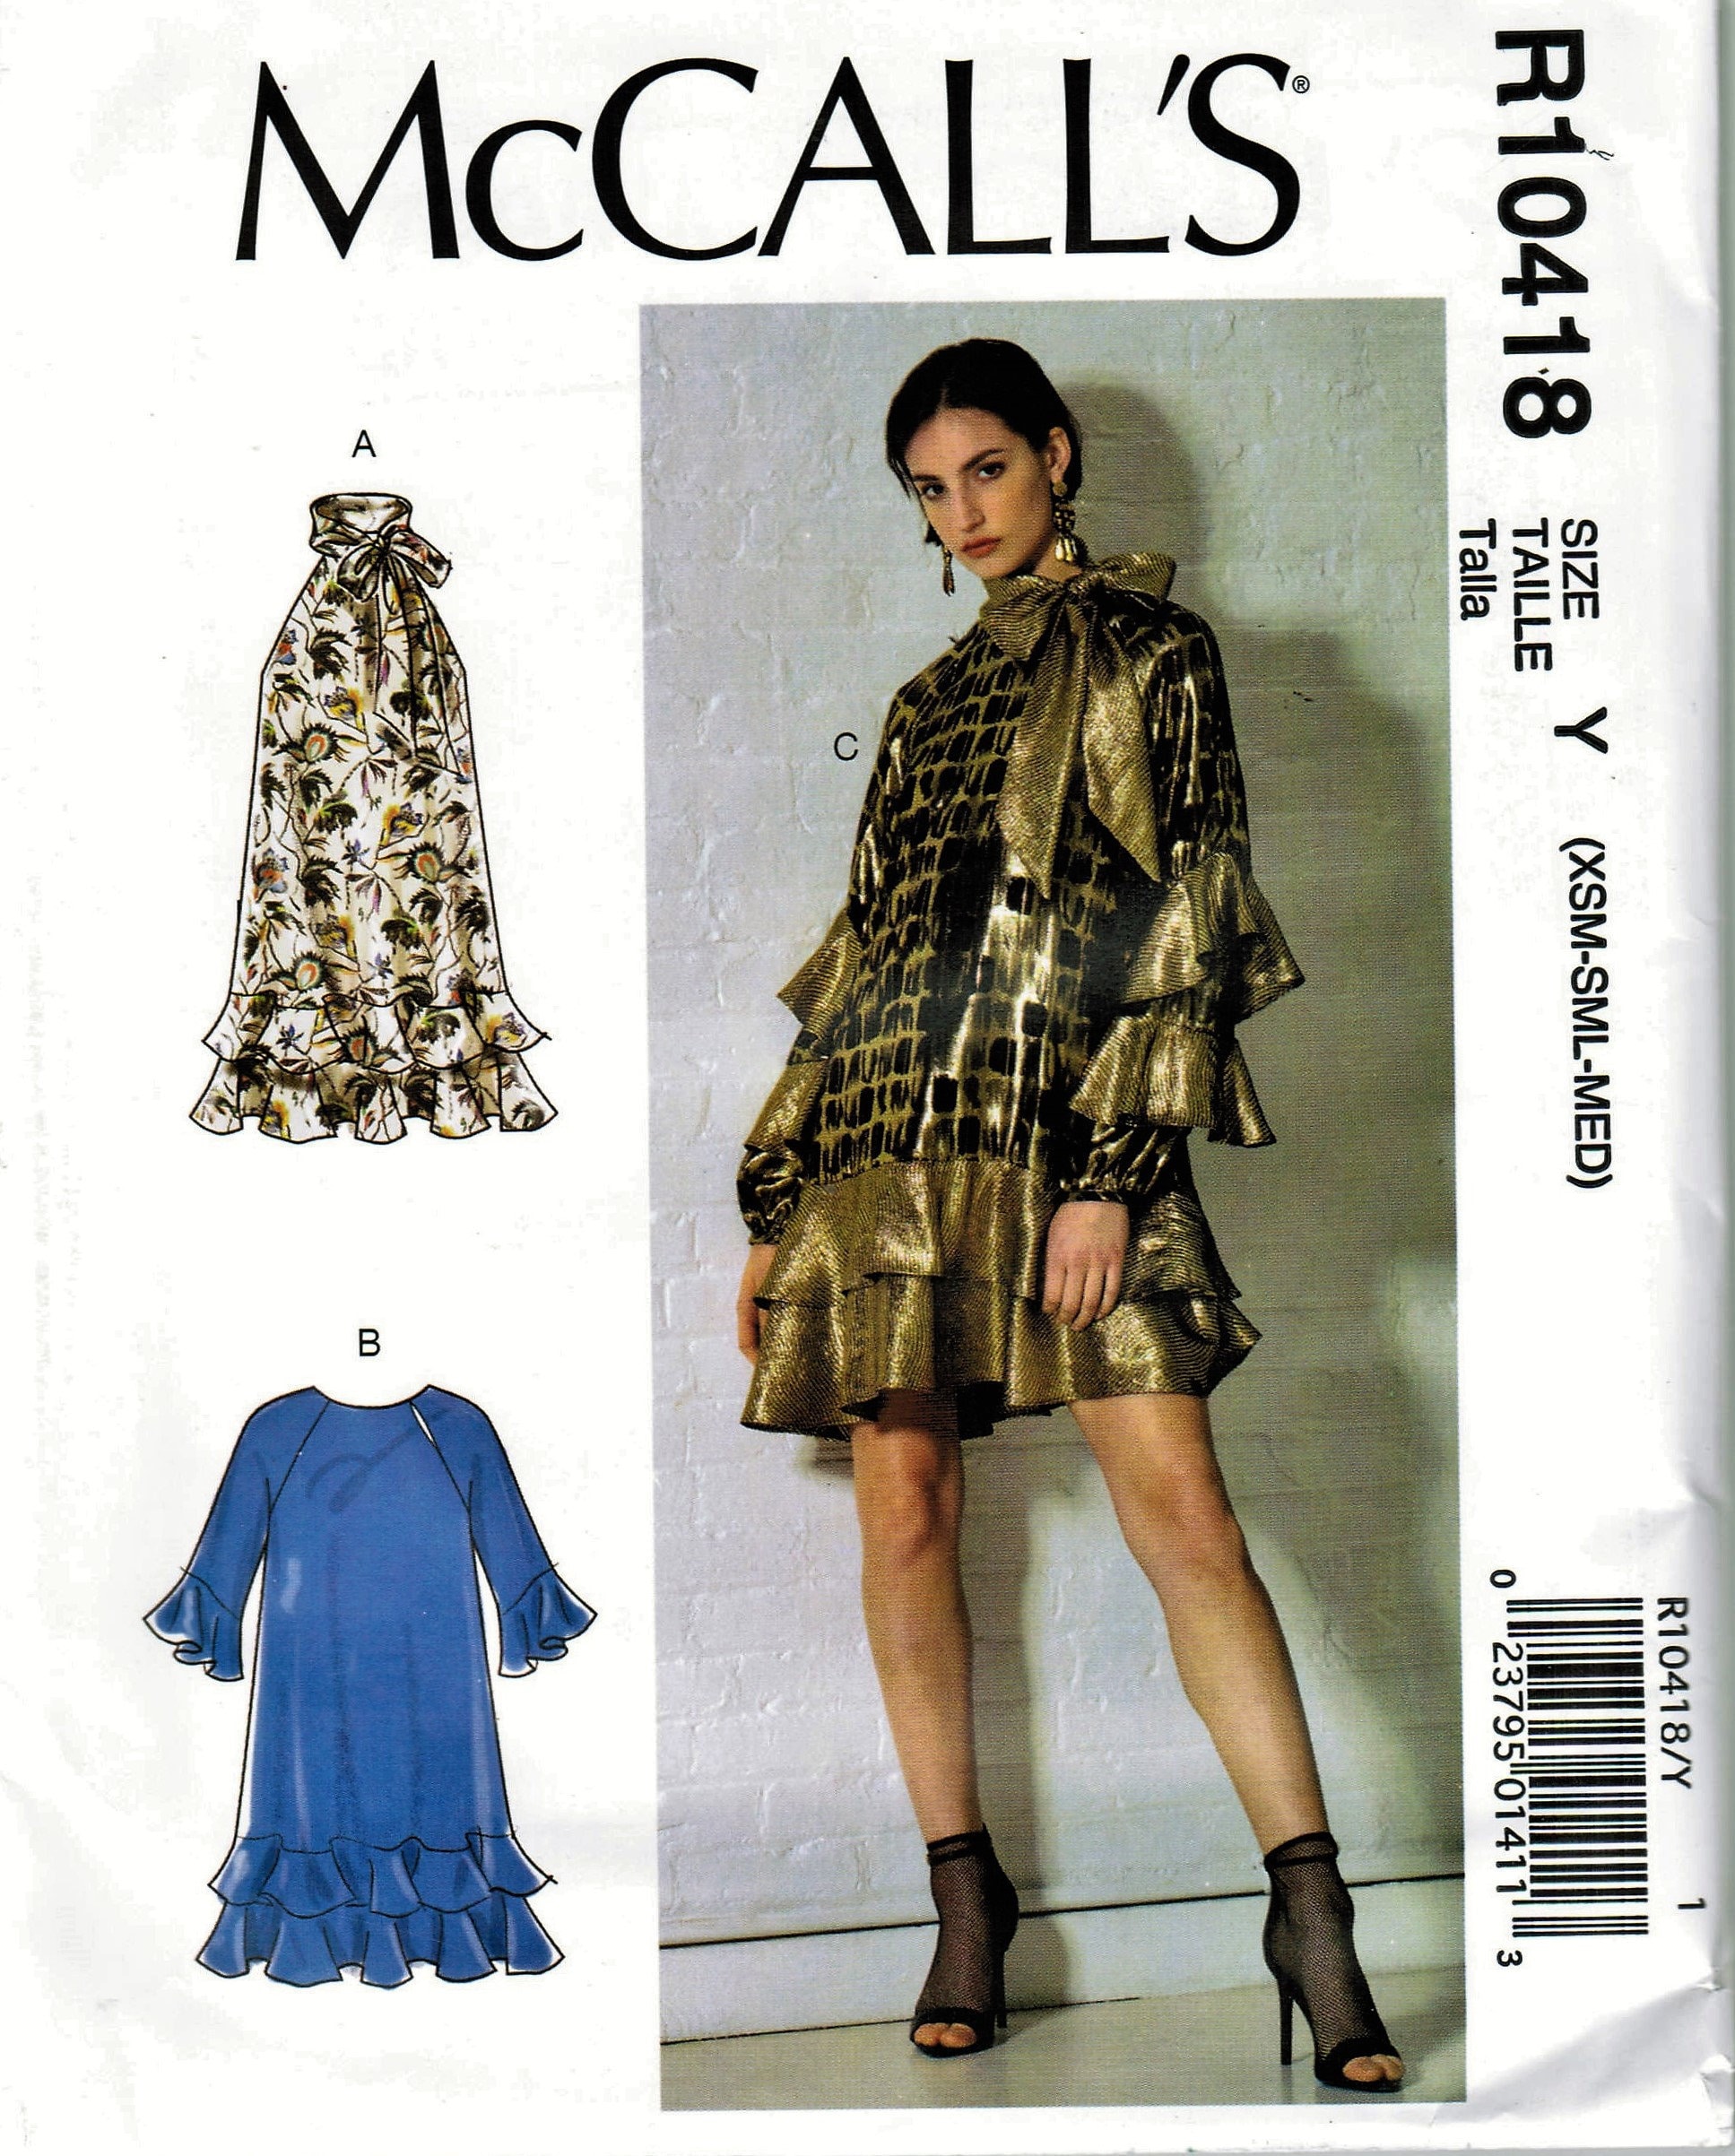 McCall's R10418 Sewing Pattern for Misses Dresses in sizes | Etsy